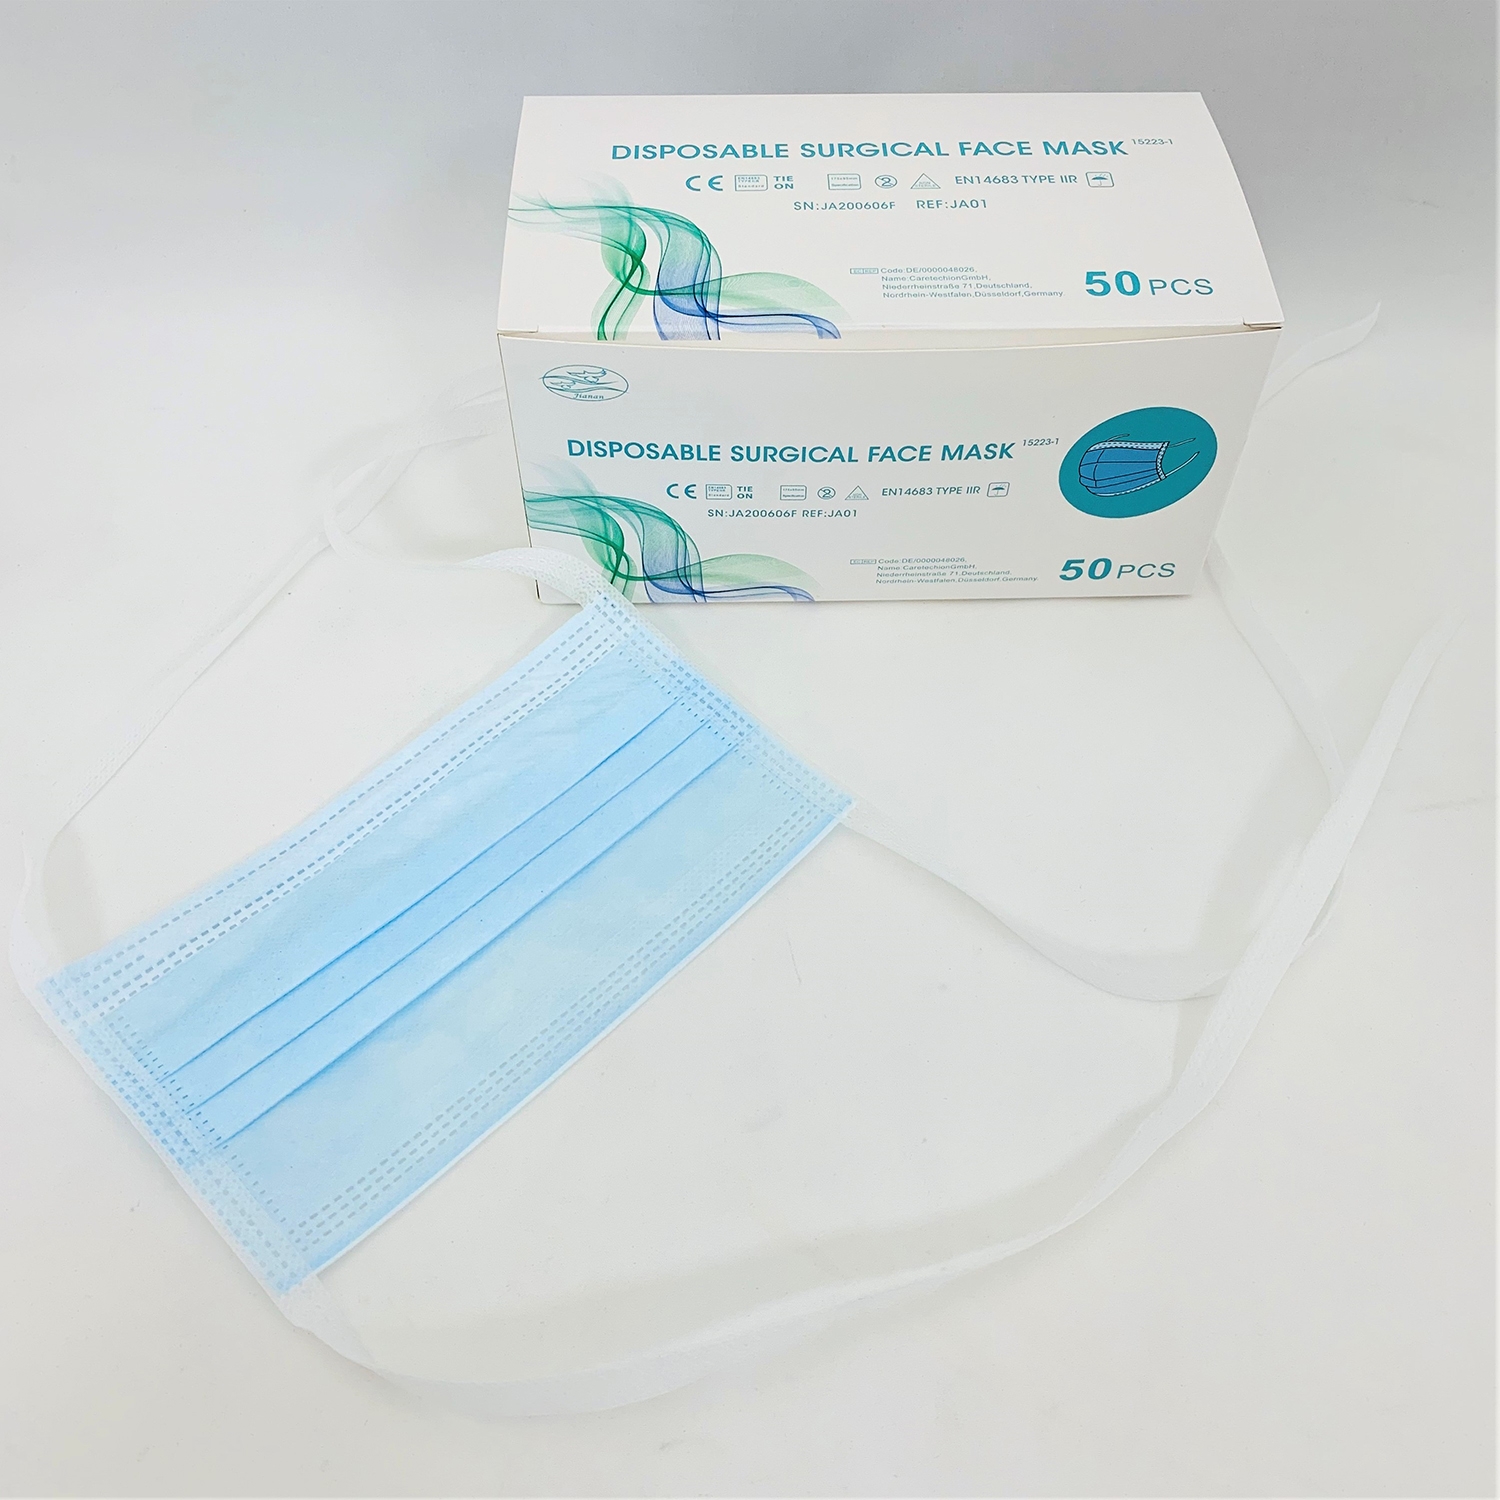 Masque buccal chirurgical type IIR - 3 couches - 4 lanières (50 pcs)